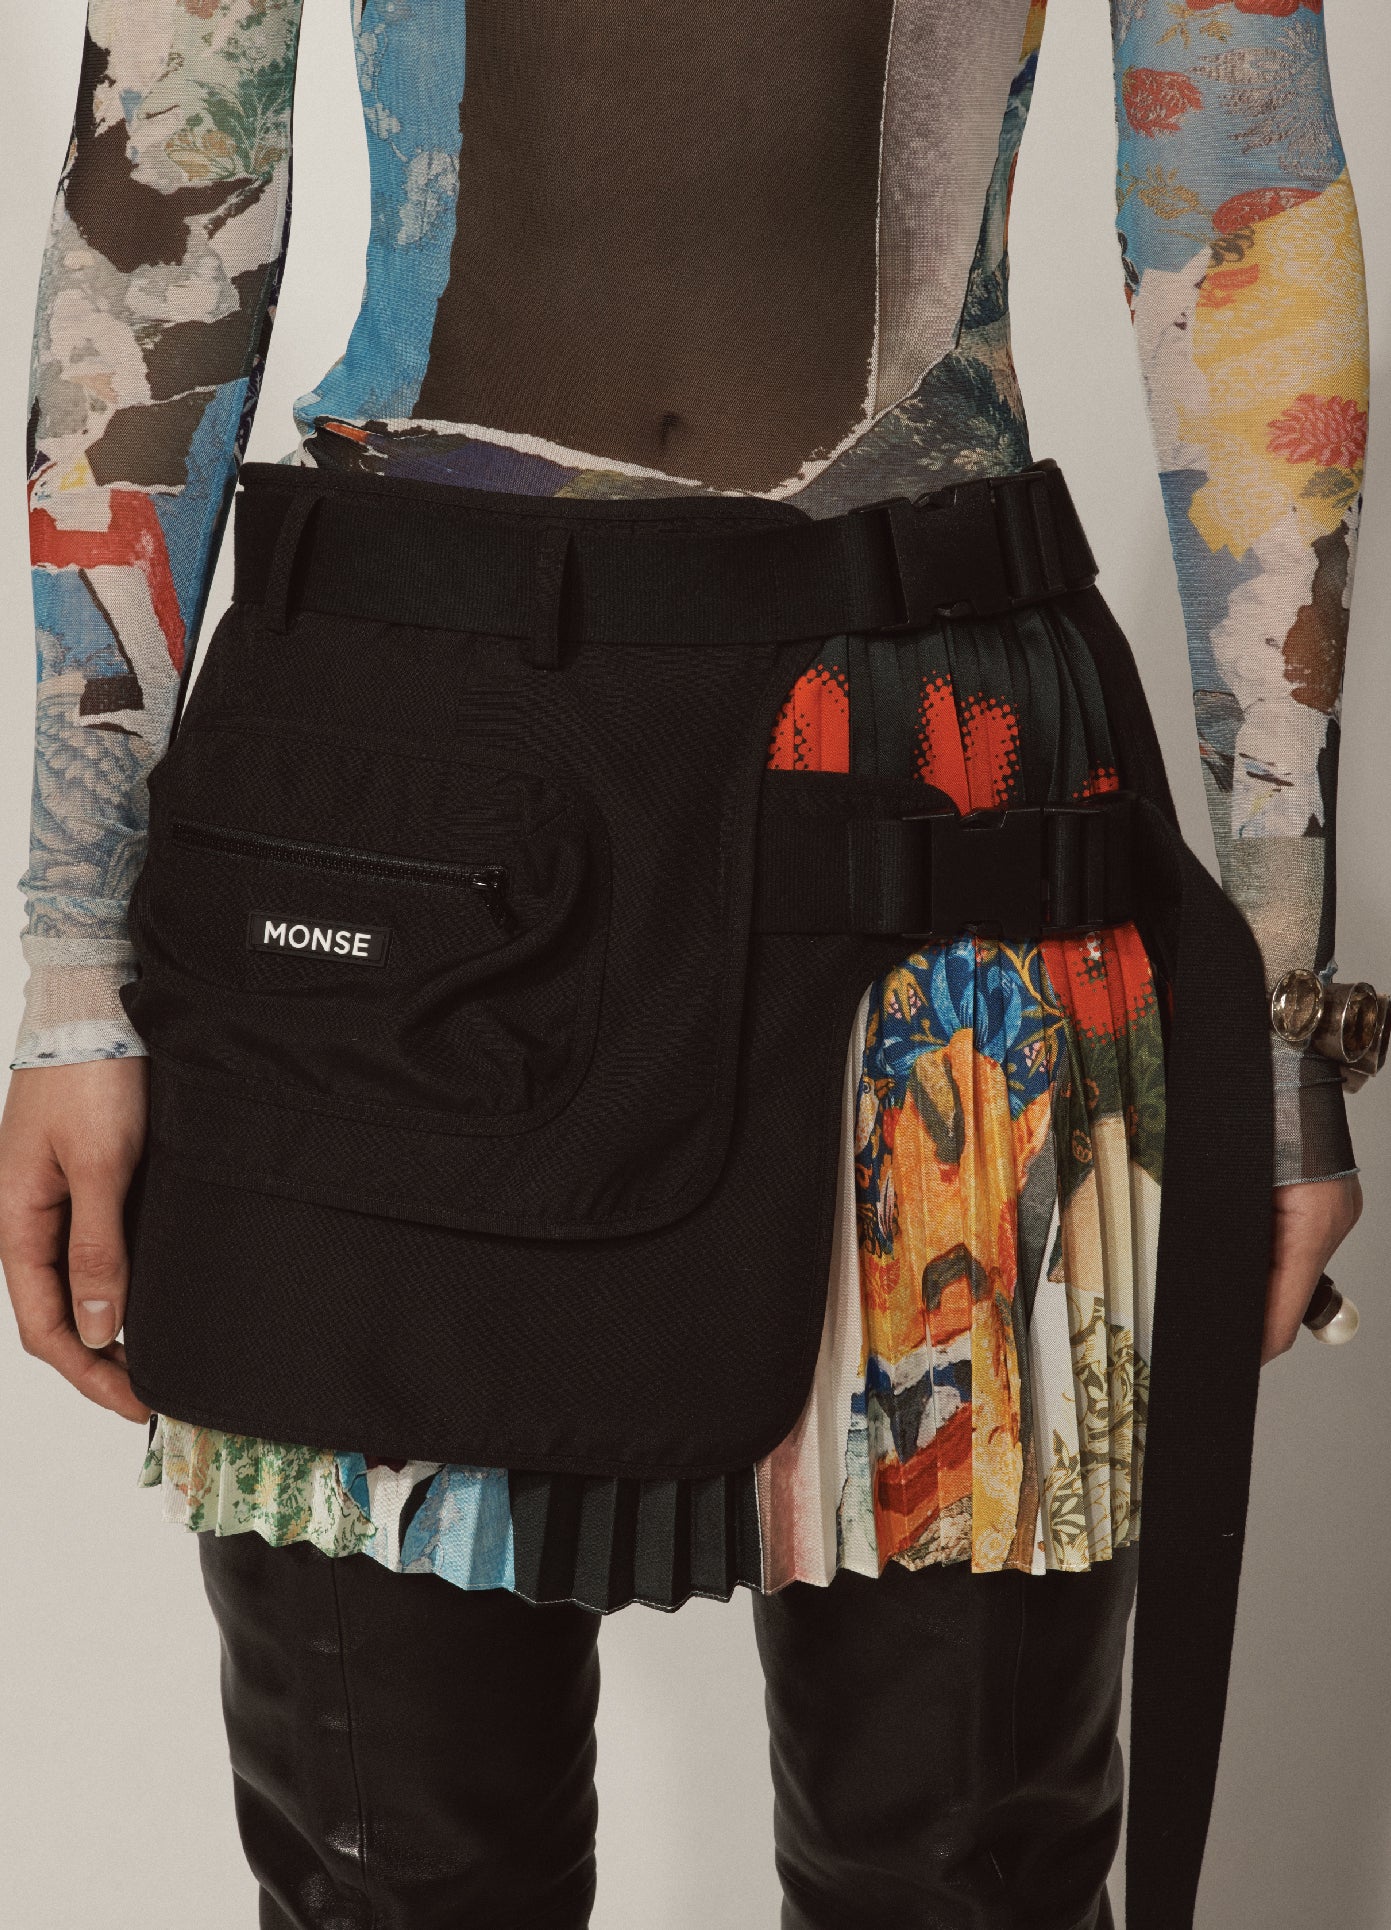 MONSE Pouch Pleated Skirt in Black Multi on Model Detailed View